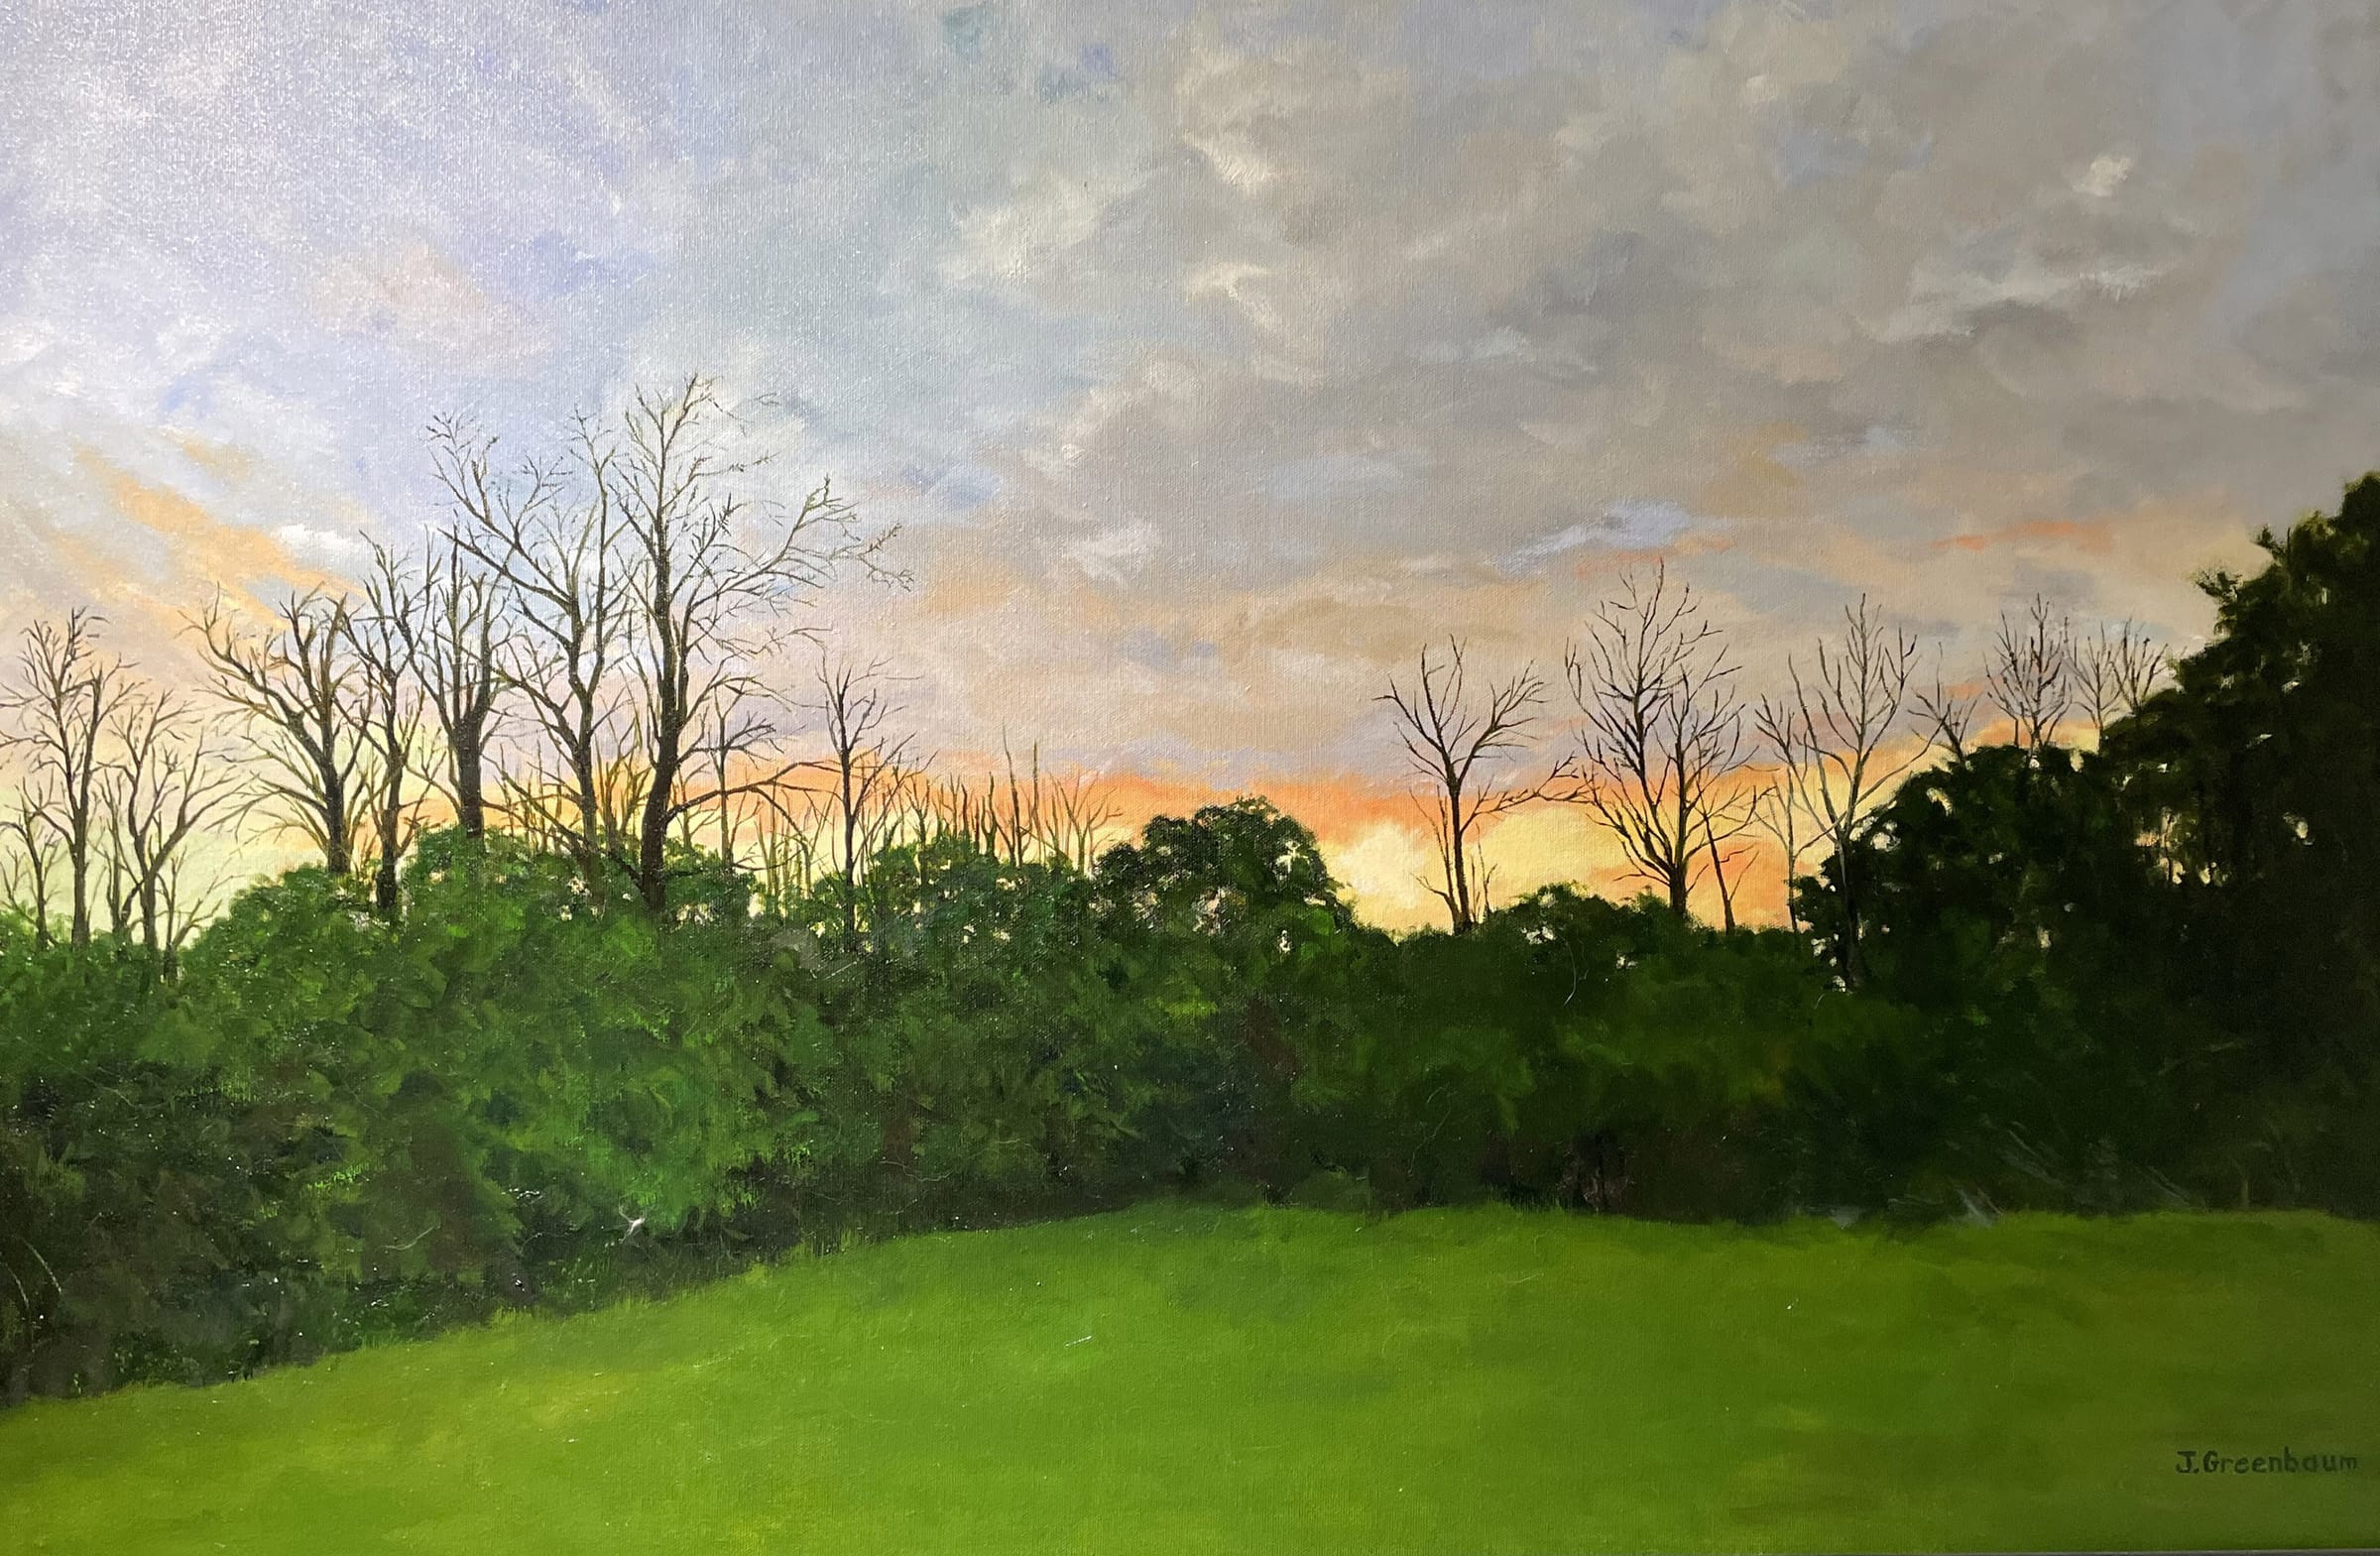 Member Artist Showcase Exhibition At Mills Pond Gallery March 4 – April 1, 2023